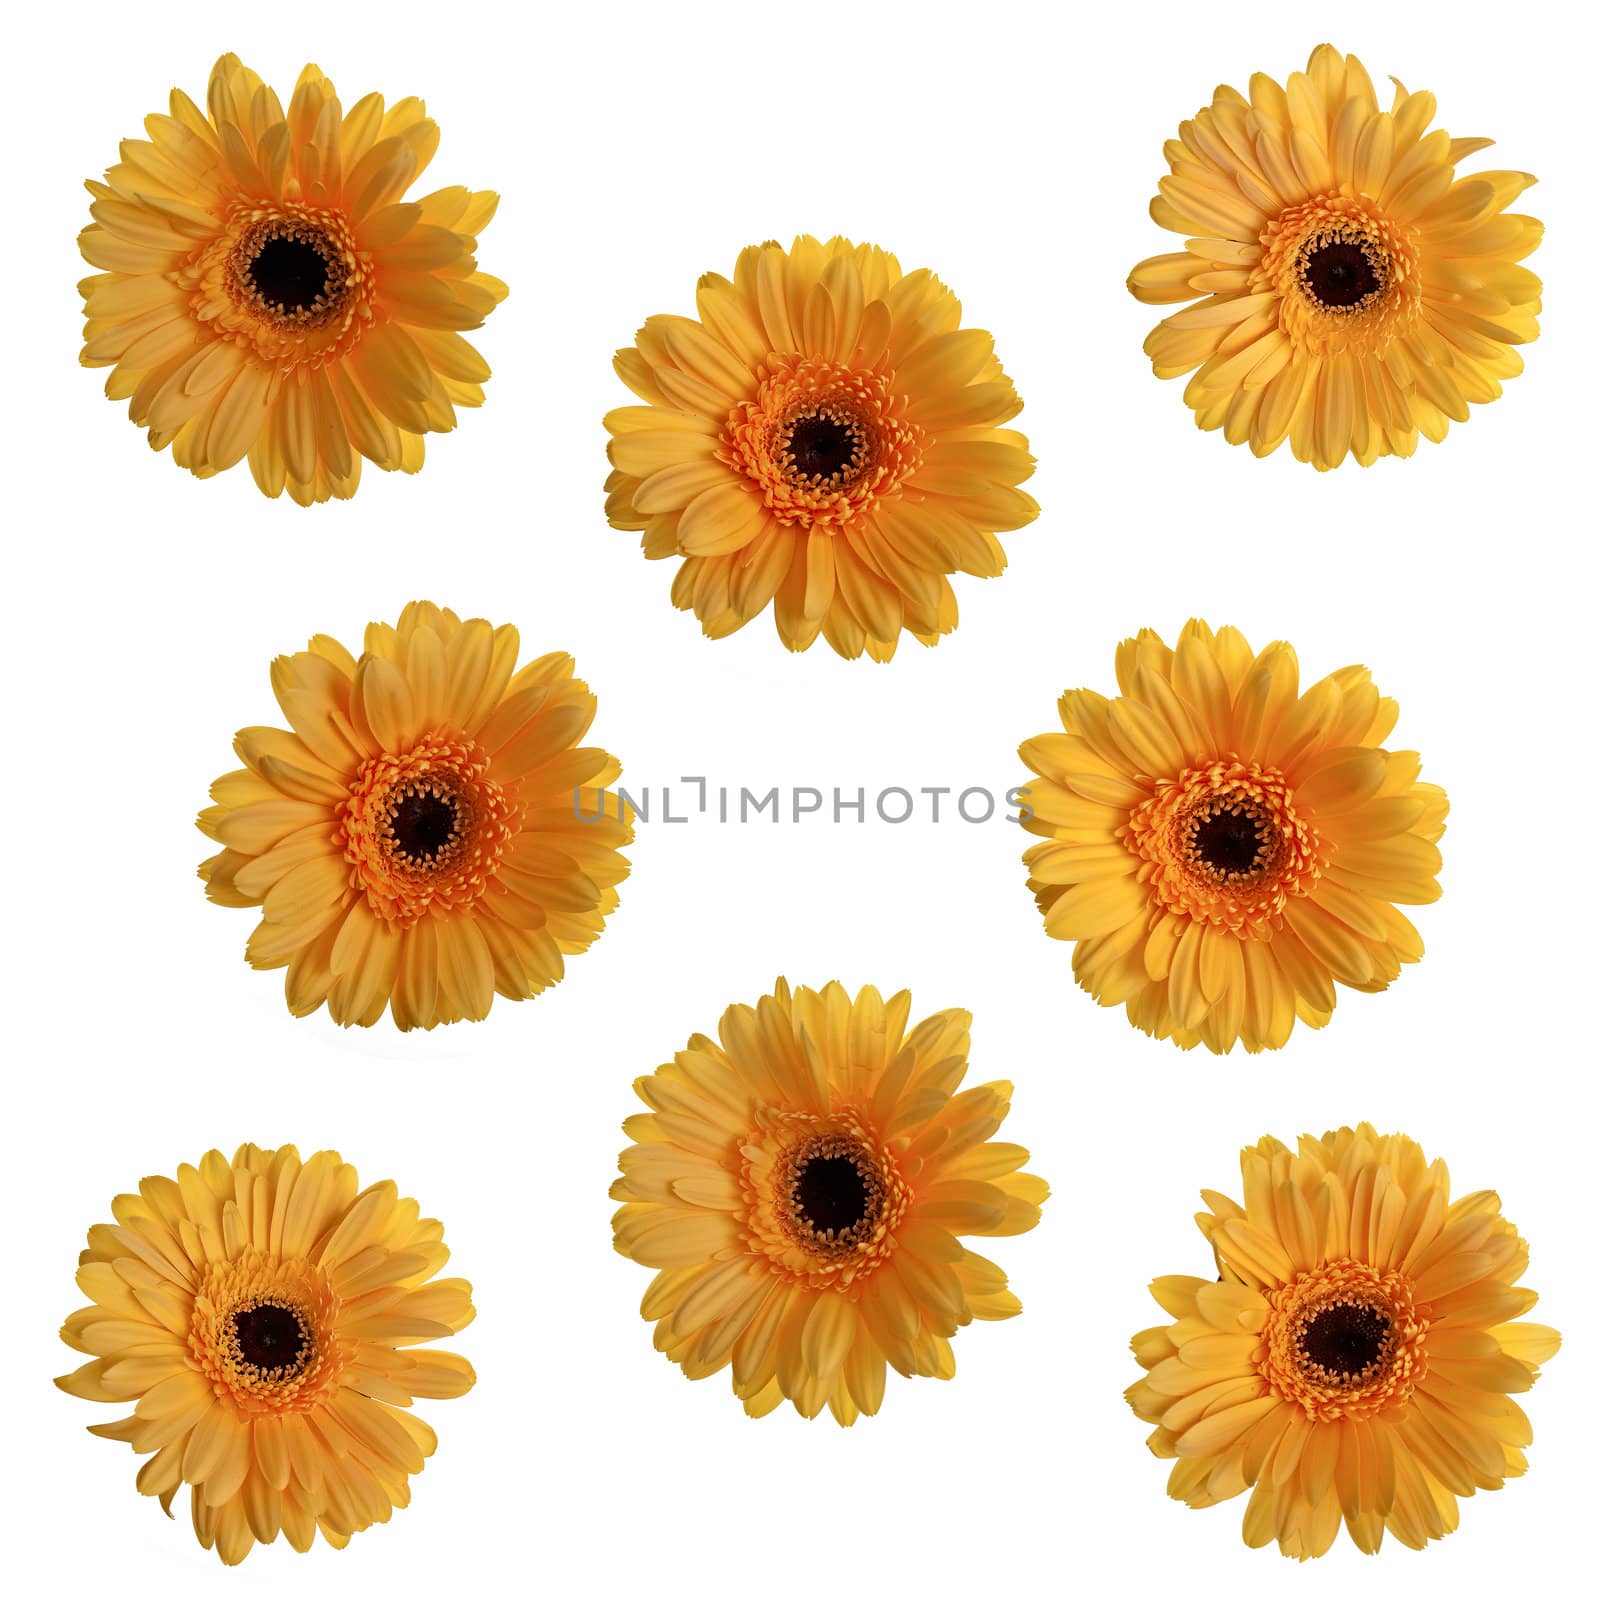 Yellow gerbera flowers isolated on white background.